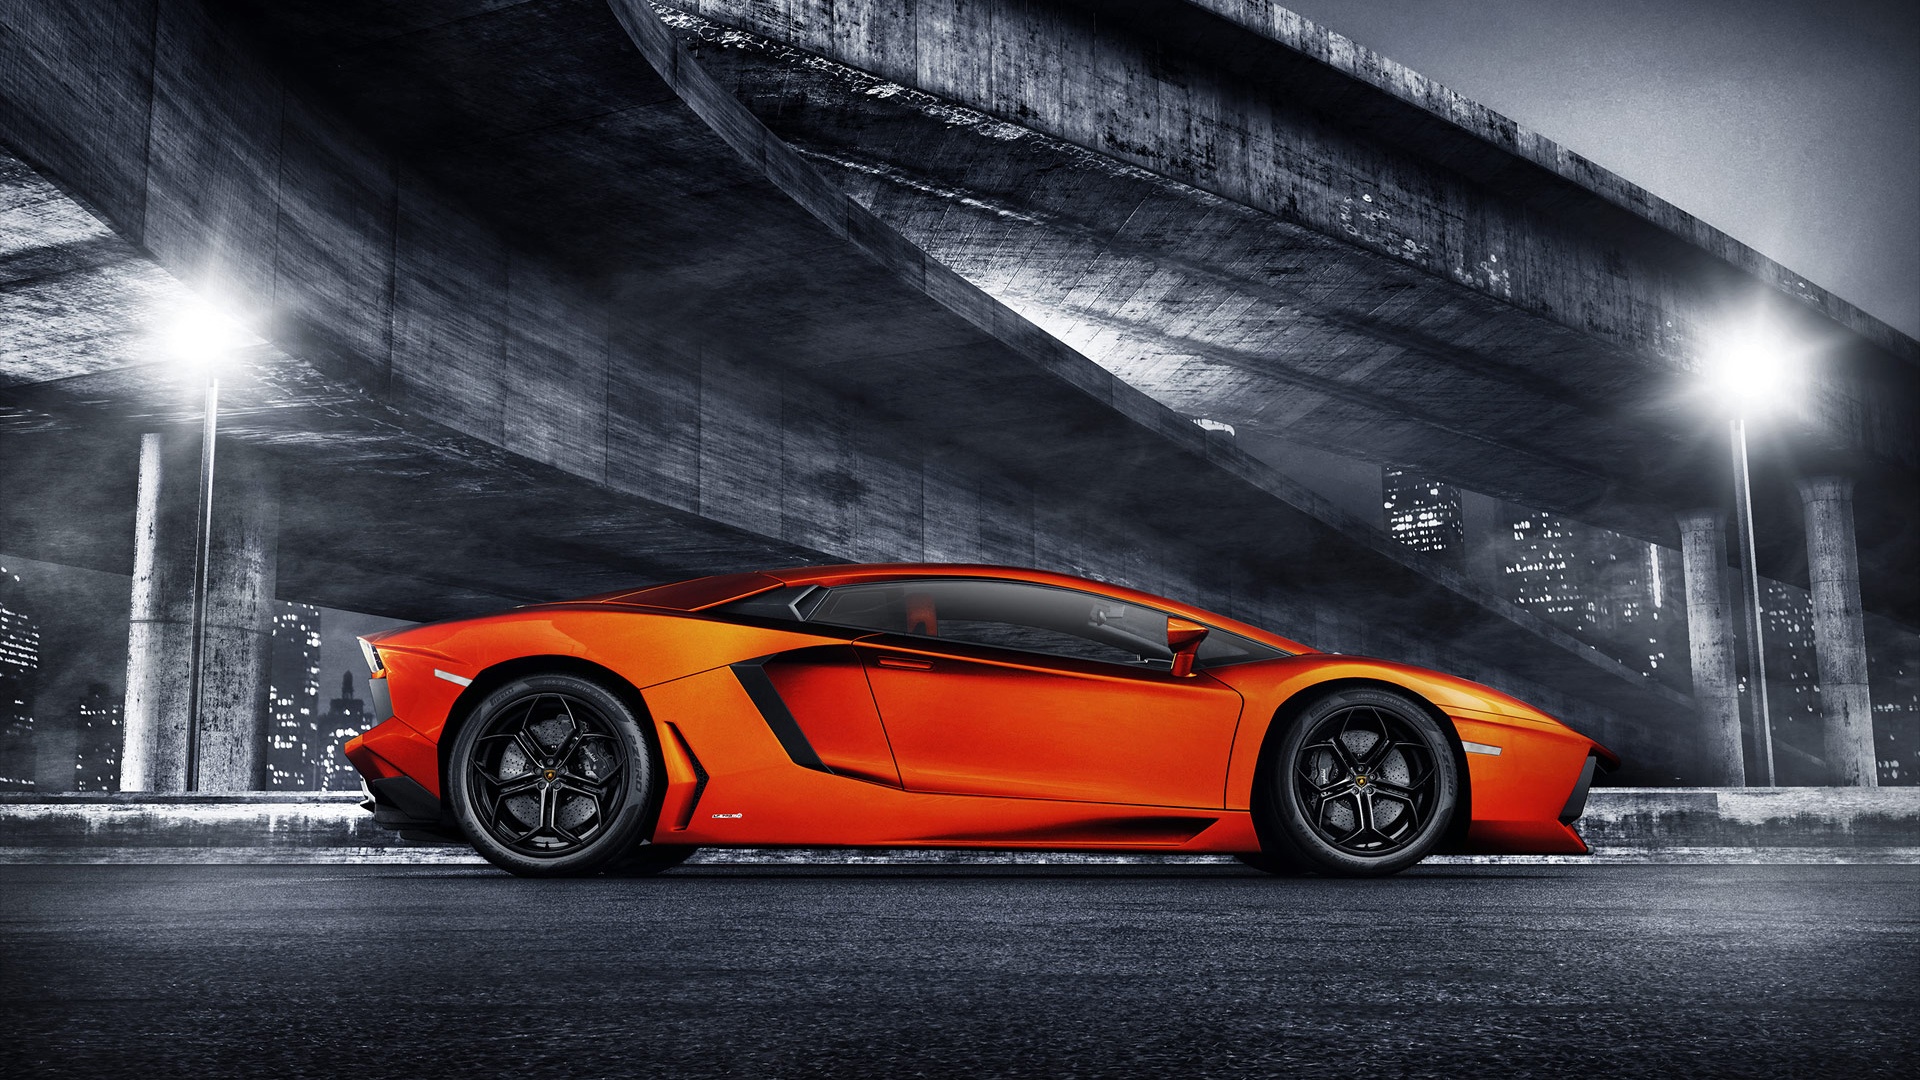 Wallpapers Of Sports Cars